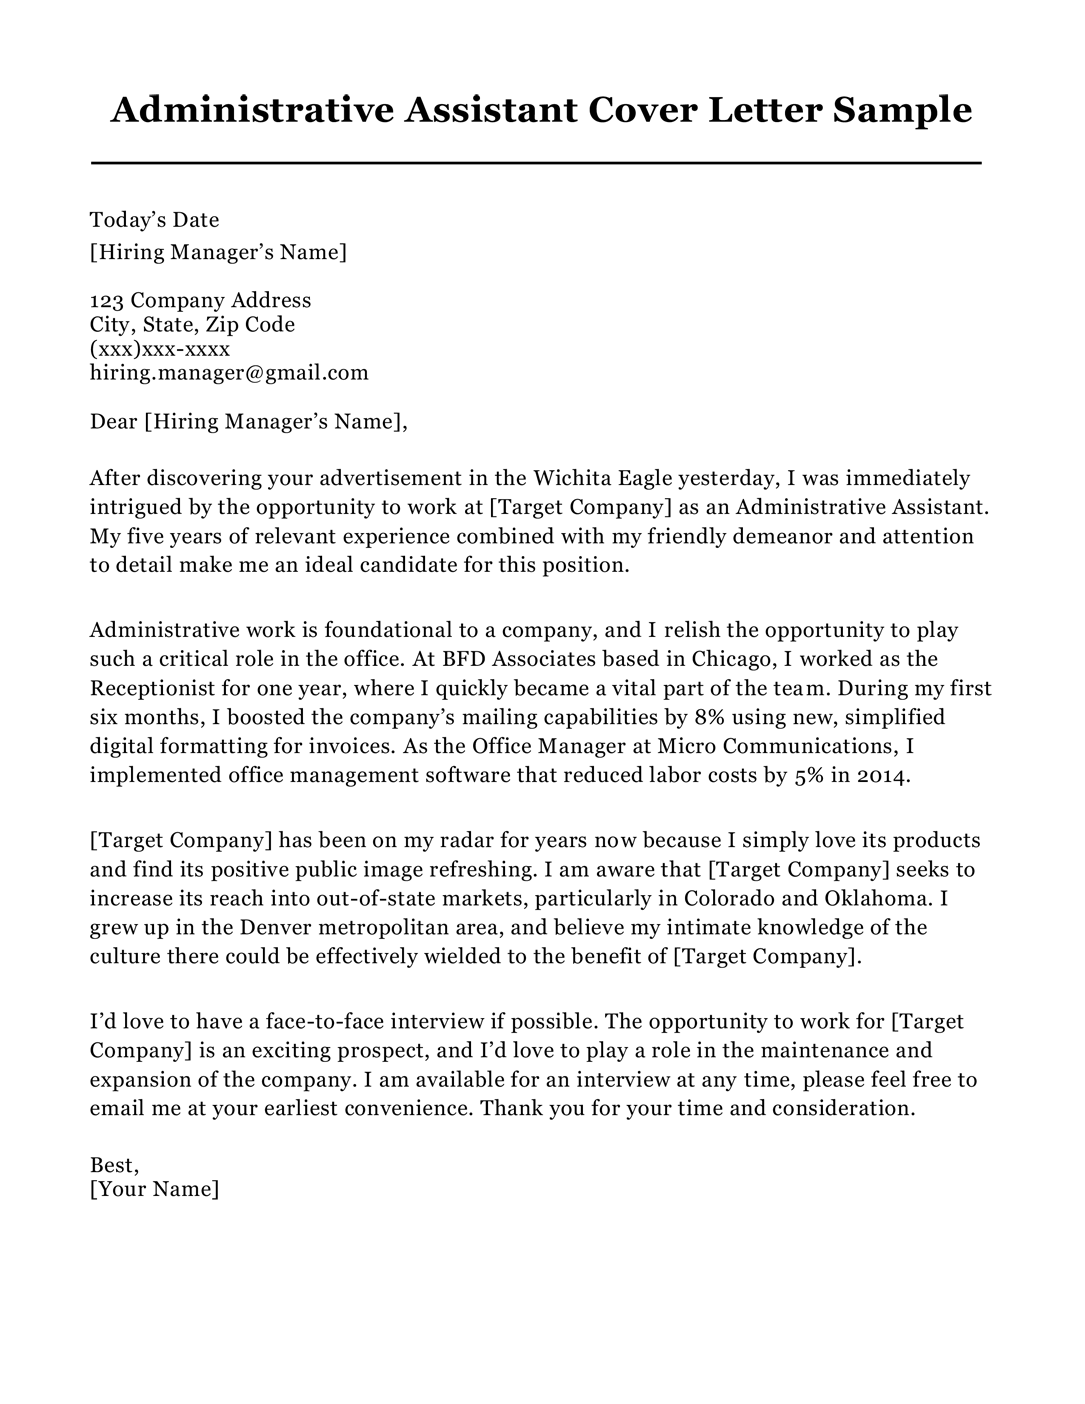 personal assistant cover letter with experience